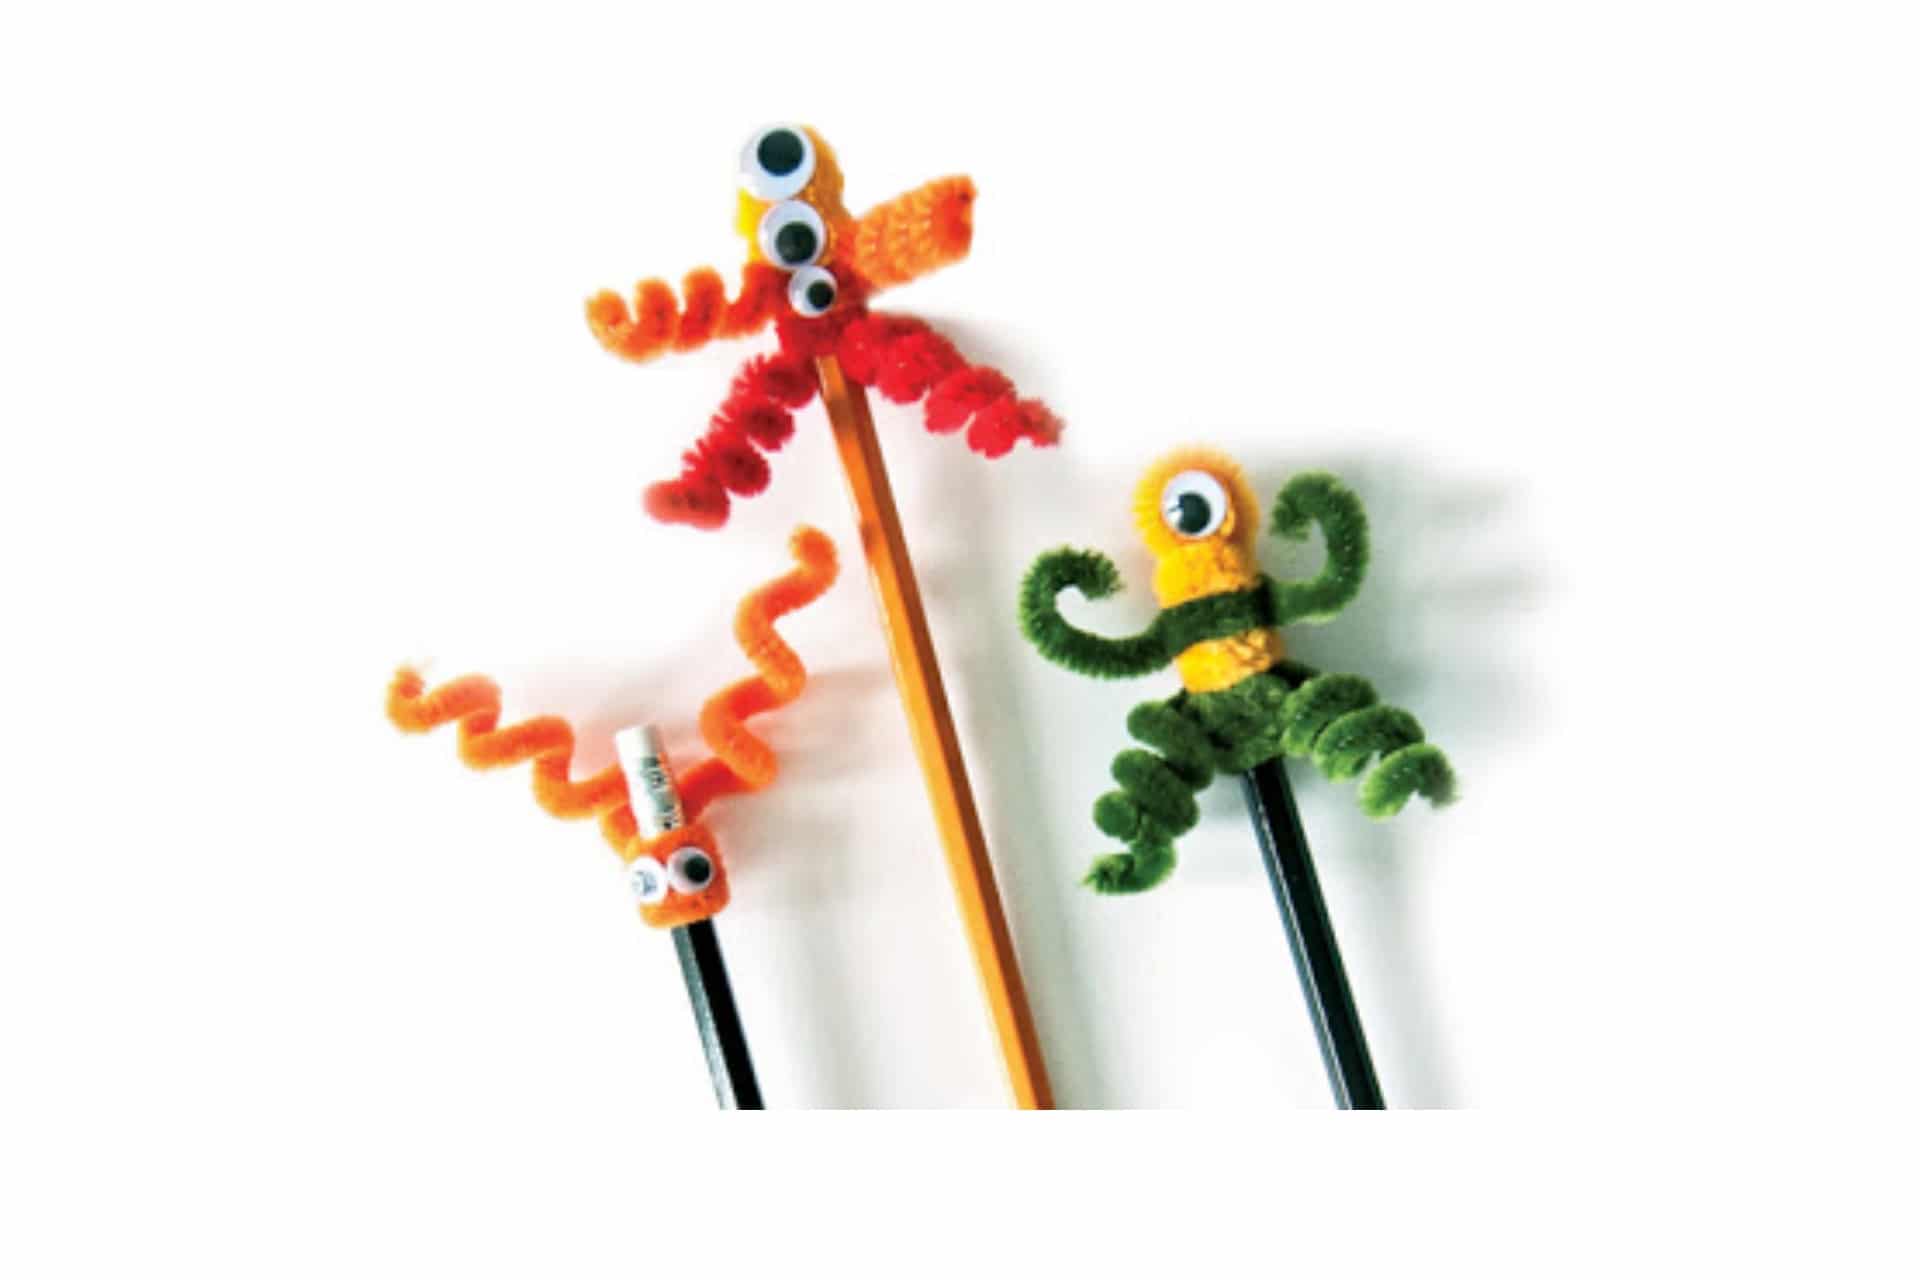 pipecleaner bent into shapes on top of pencils